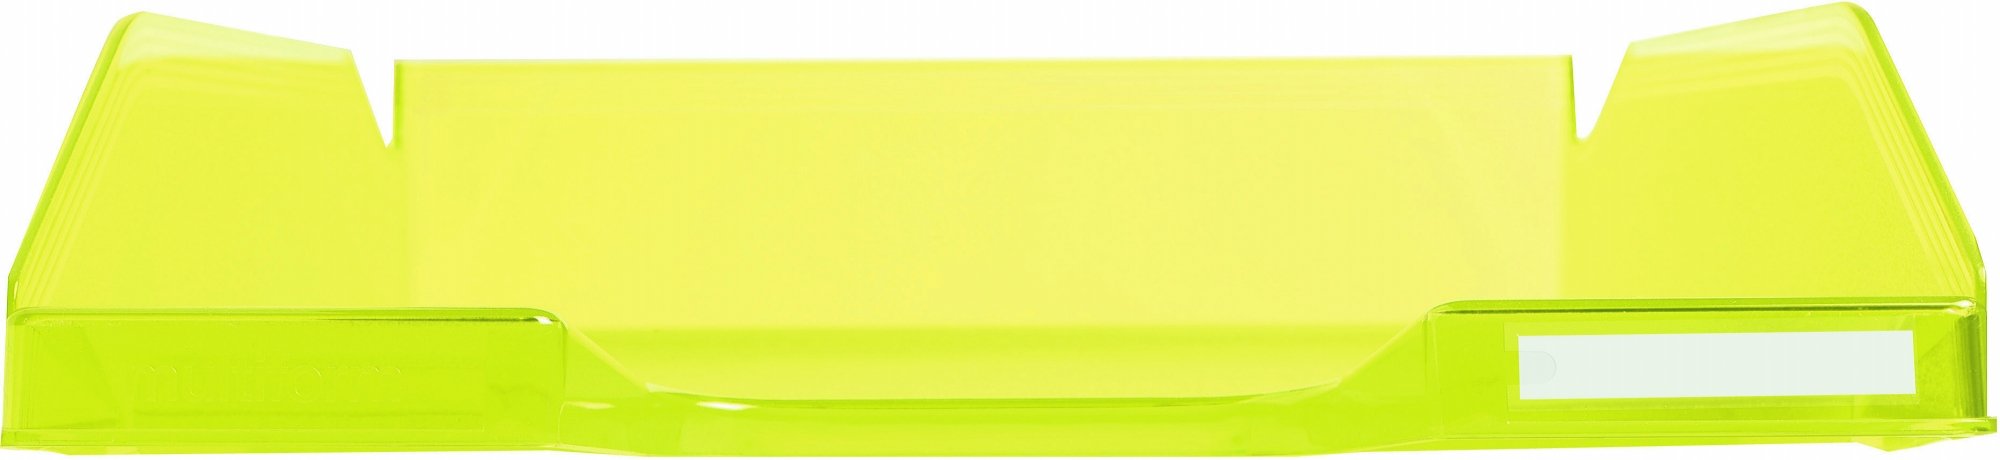 Best Value Exacompta Linicolor Letter Tray Combo Midi - Lime Green Transparent Glossy